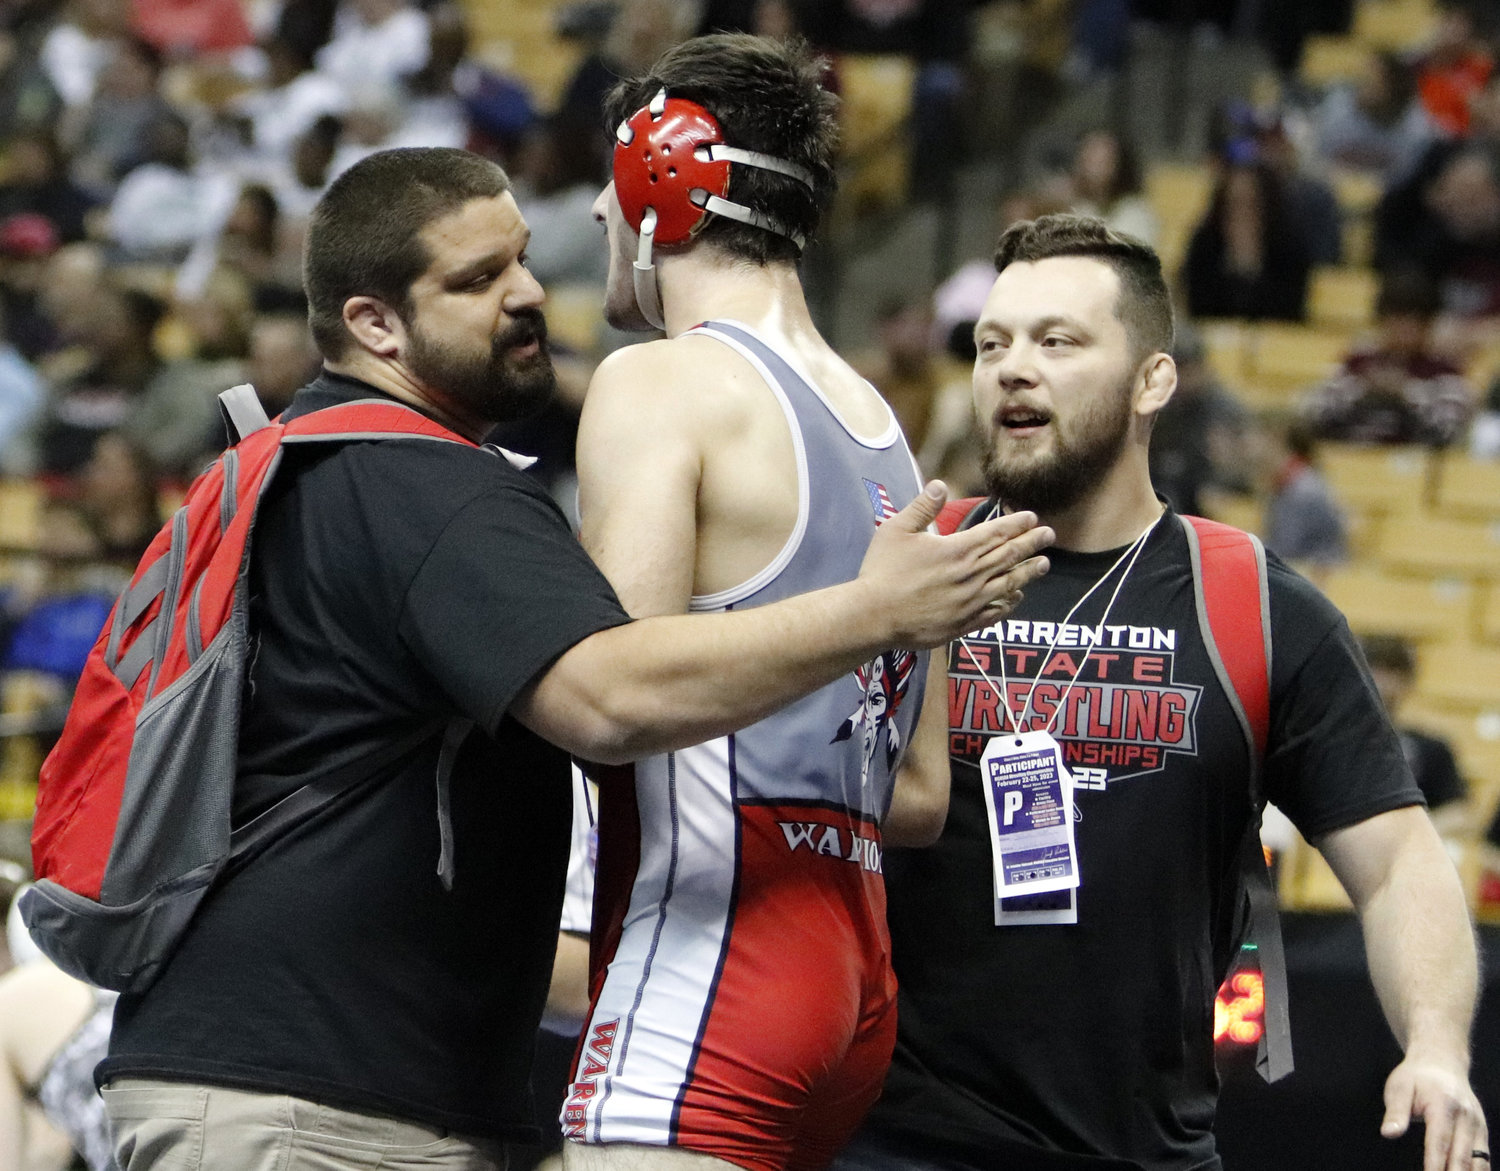 Warrenton coaches congratulate Jacob Ruff (middle) after his win in his quarterfinal match.